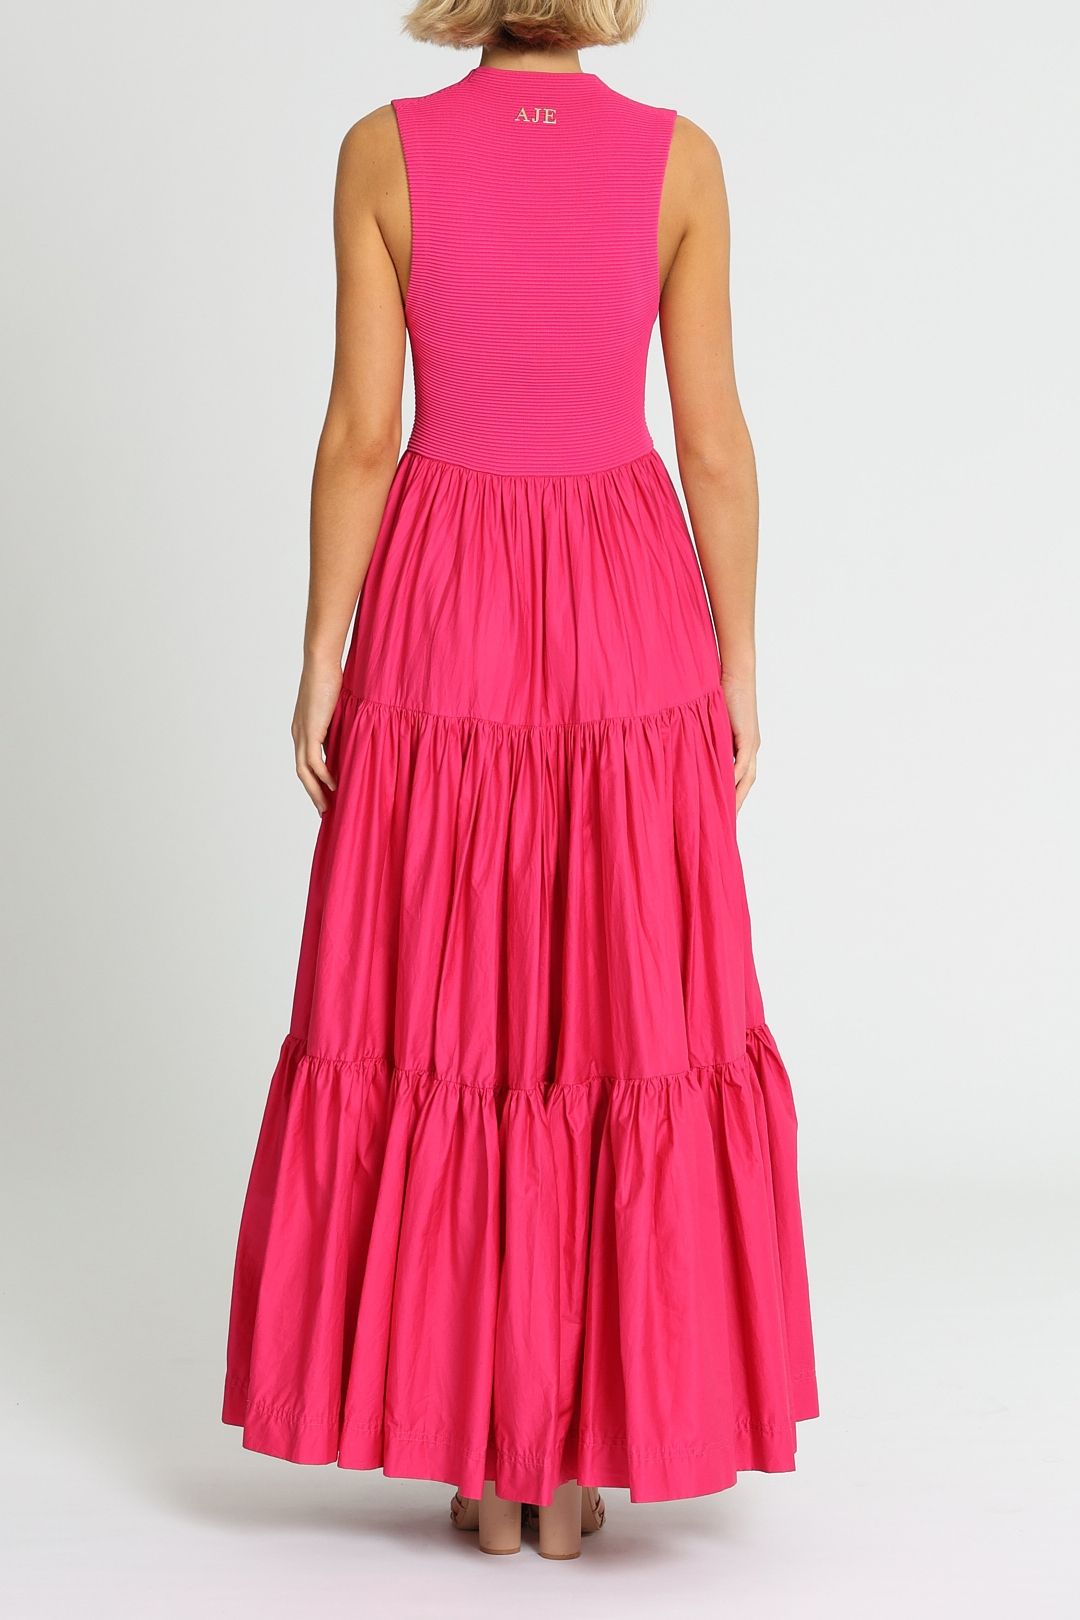 Aje Sleeveless Midi Pink Fit and Flare